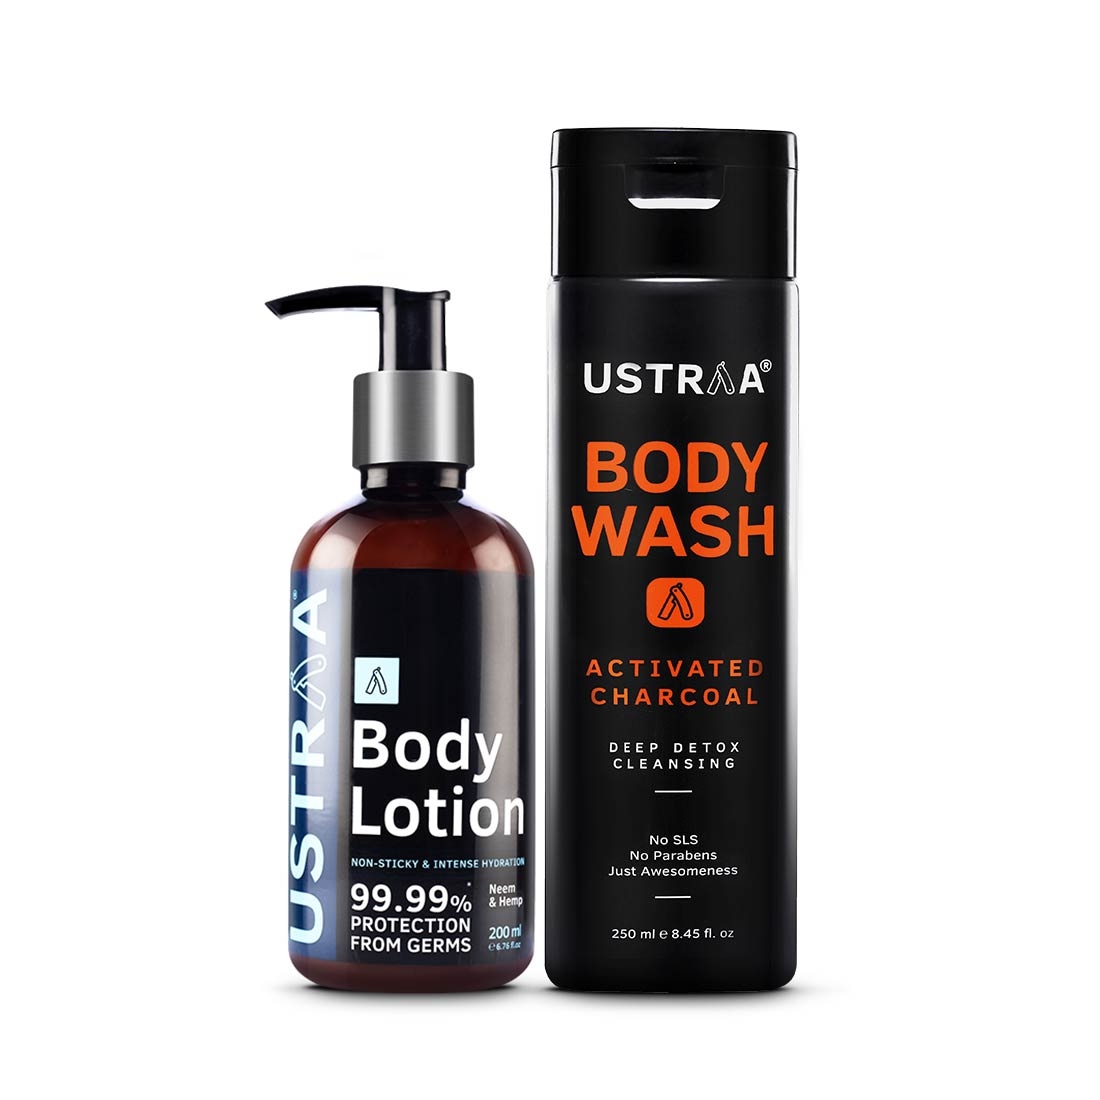 Ustraa Body Lotion Germ Free - 200ml & Body Wash - Activated Charcoal - 250ml
